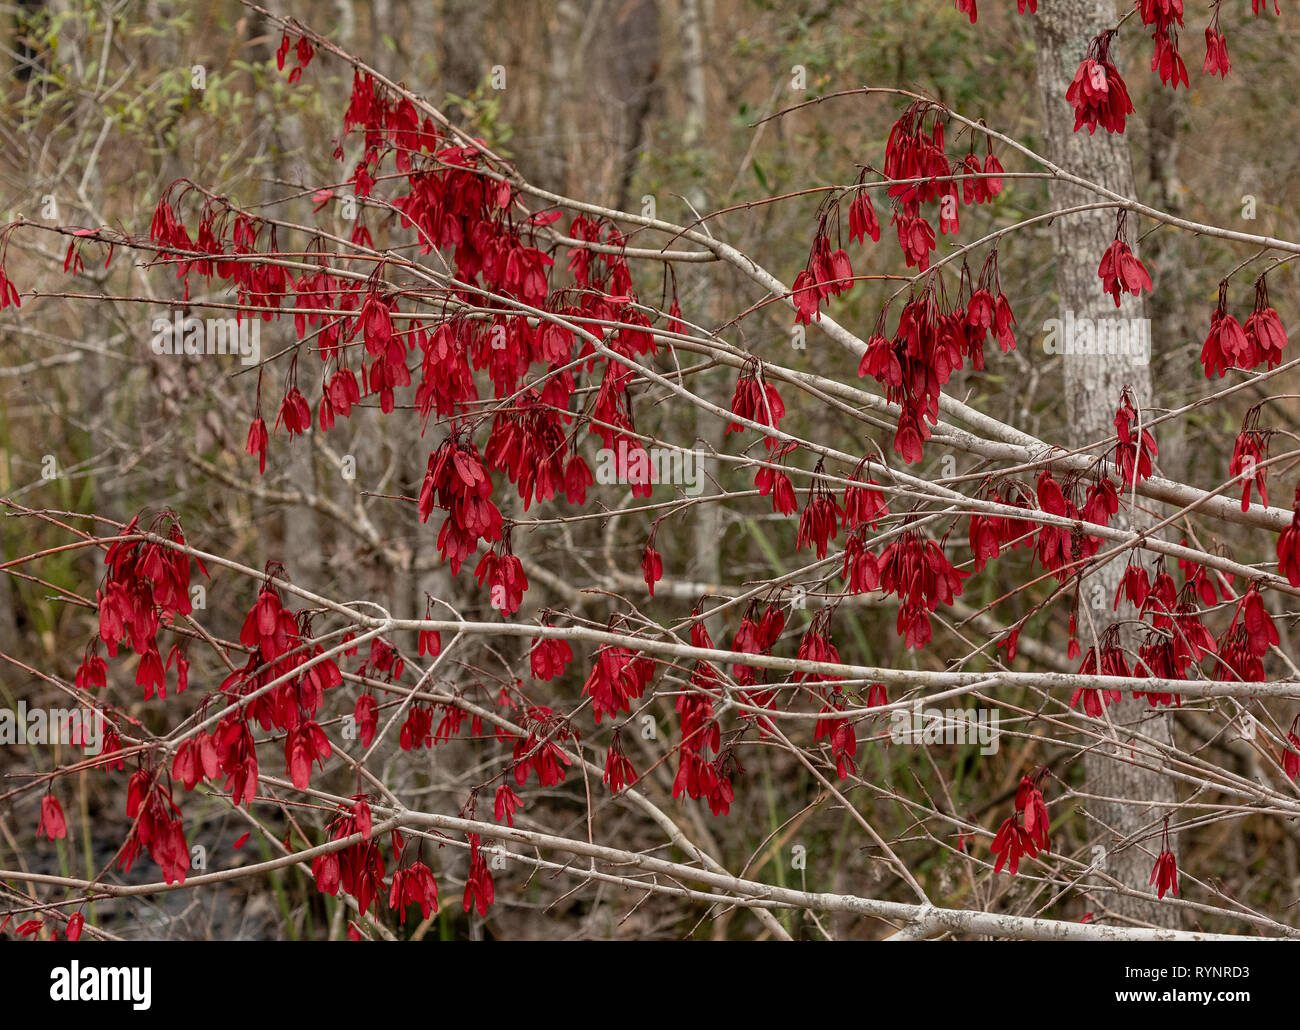 Red maple, Acer rubrum in fruit in winter, with beautiful red samaras. Florida. Stock Photo